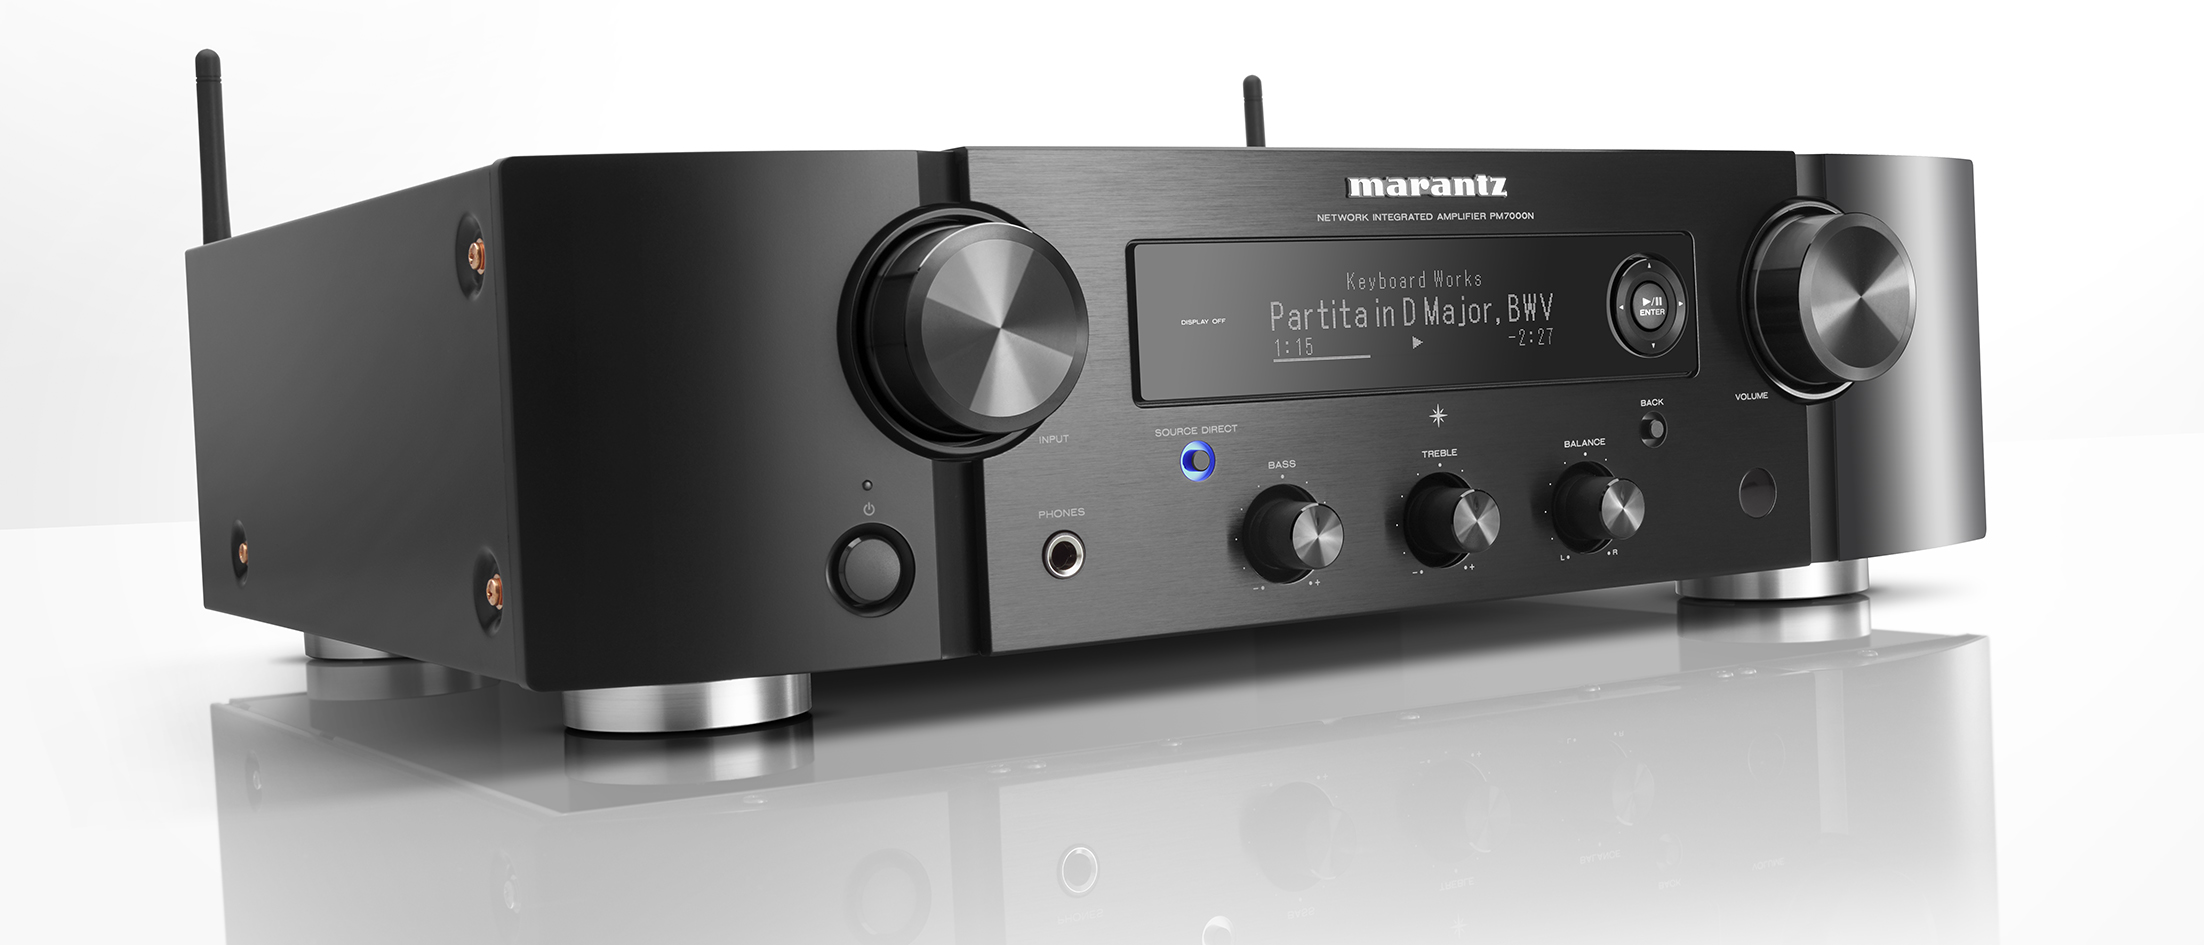 Marantz PM6007 Stereo integrated amplifier with built-in DAC at Crutchfield